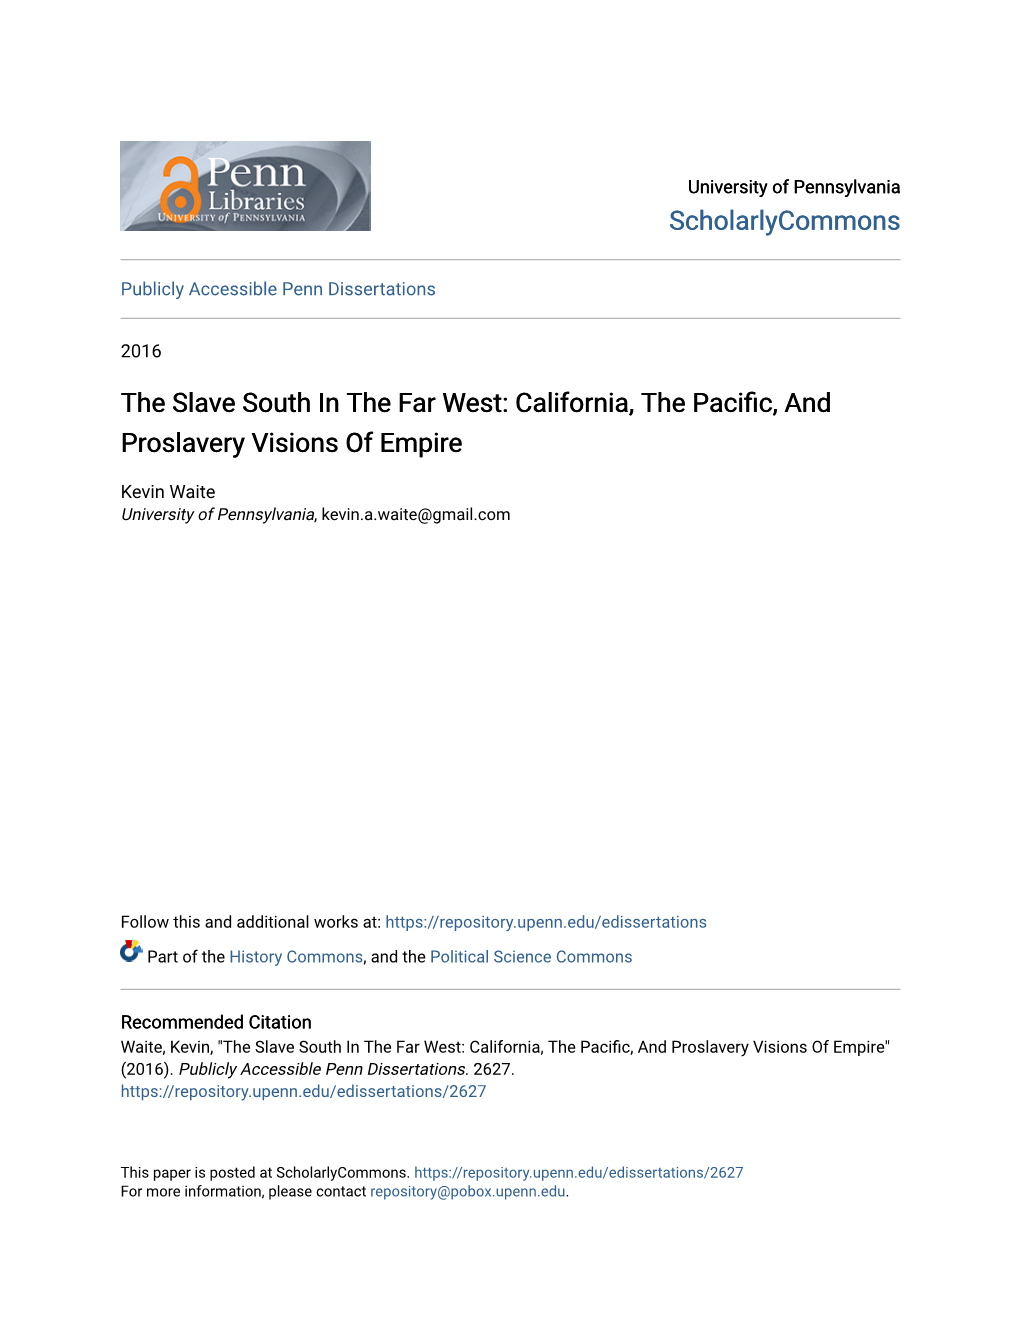 The Slave South in the Far West: California, the Pacific, and Proslavery Visions of Empire